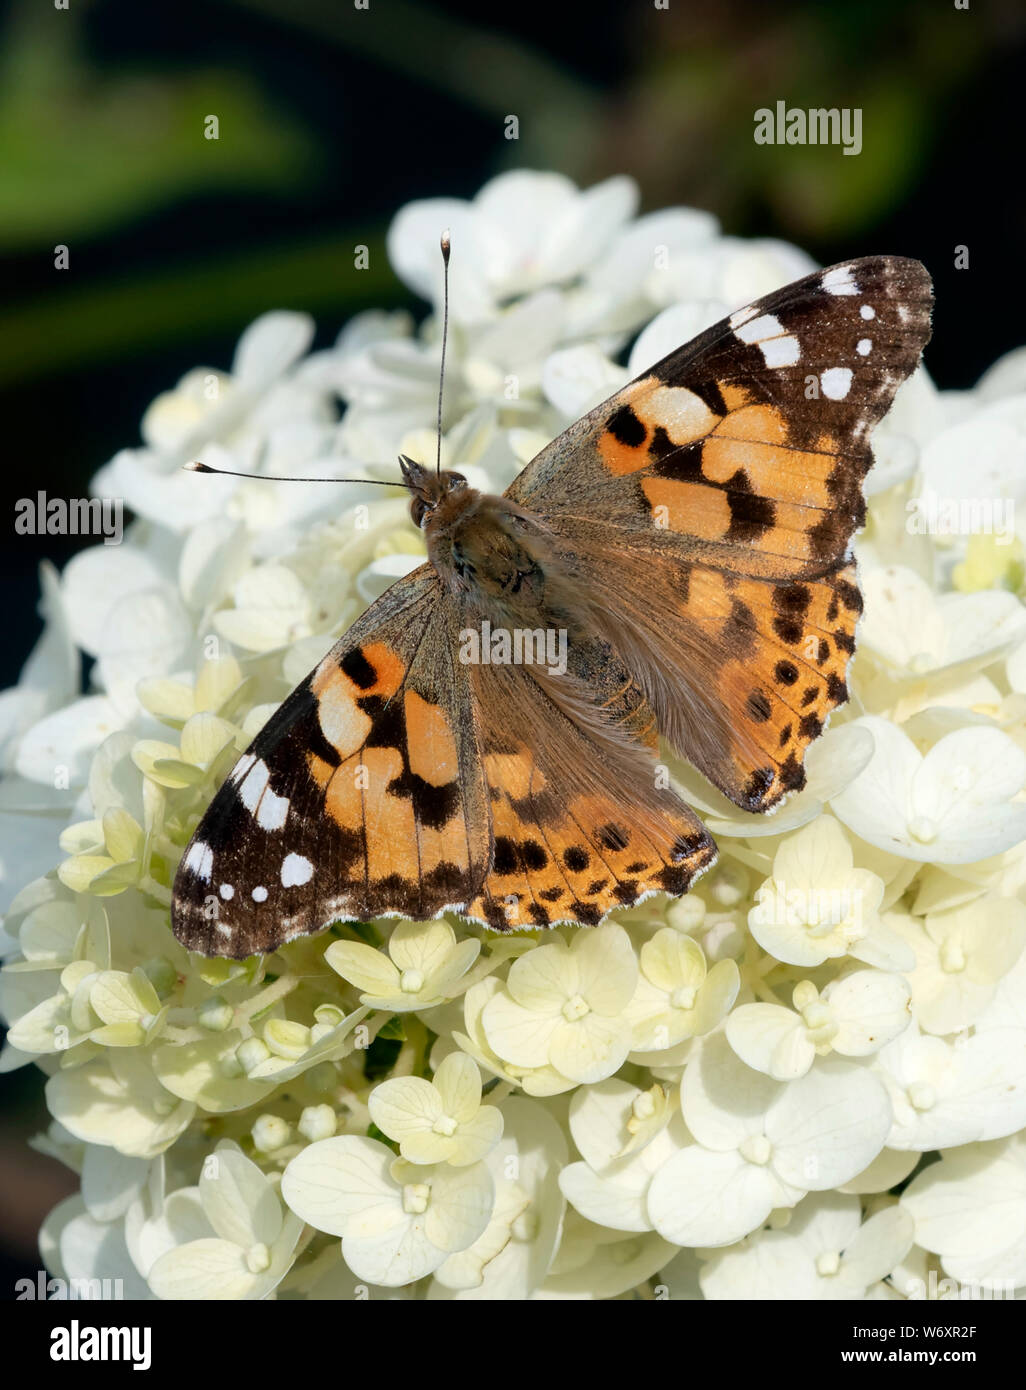 Blackpool, UK. 3rd Aug, 2019. Painted Lady butterflies numbering in their thousands, have descended upon Blackpool and other areas of the UK, in a mass migration from sub-Saharan African. This beautiful butterfly is rarely seen in the UK and certainly not in the vast numbers seen this year. Credit: Barrie Harwood/Alamy Live News. Stock Photo